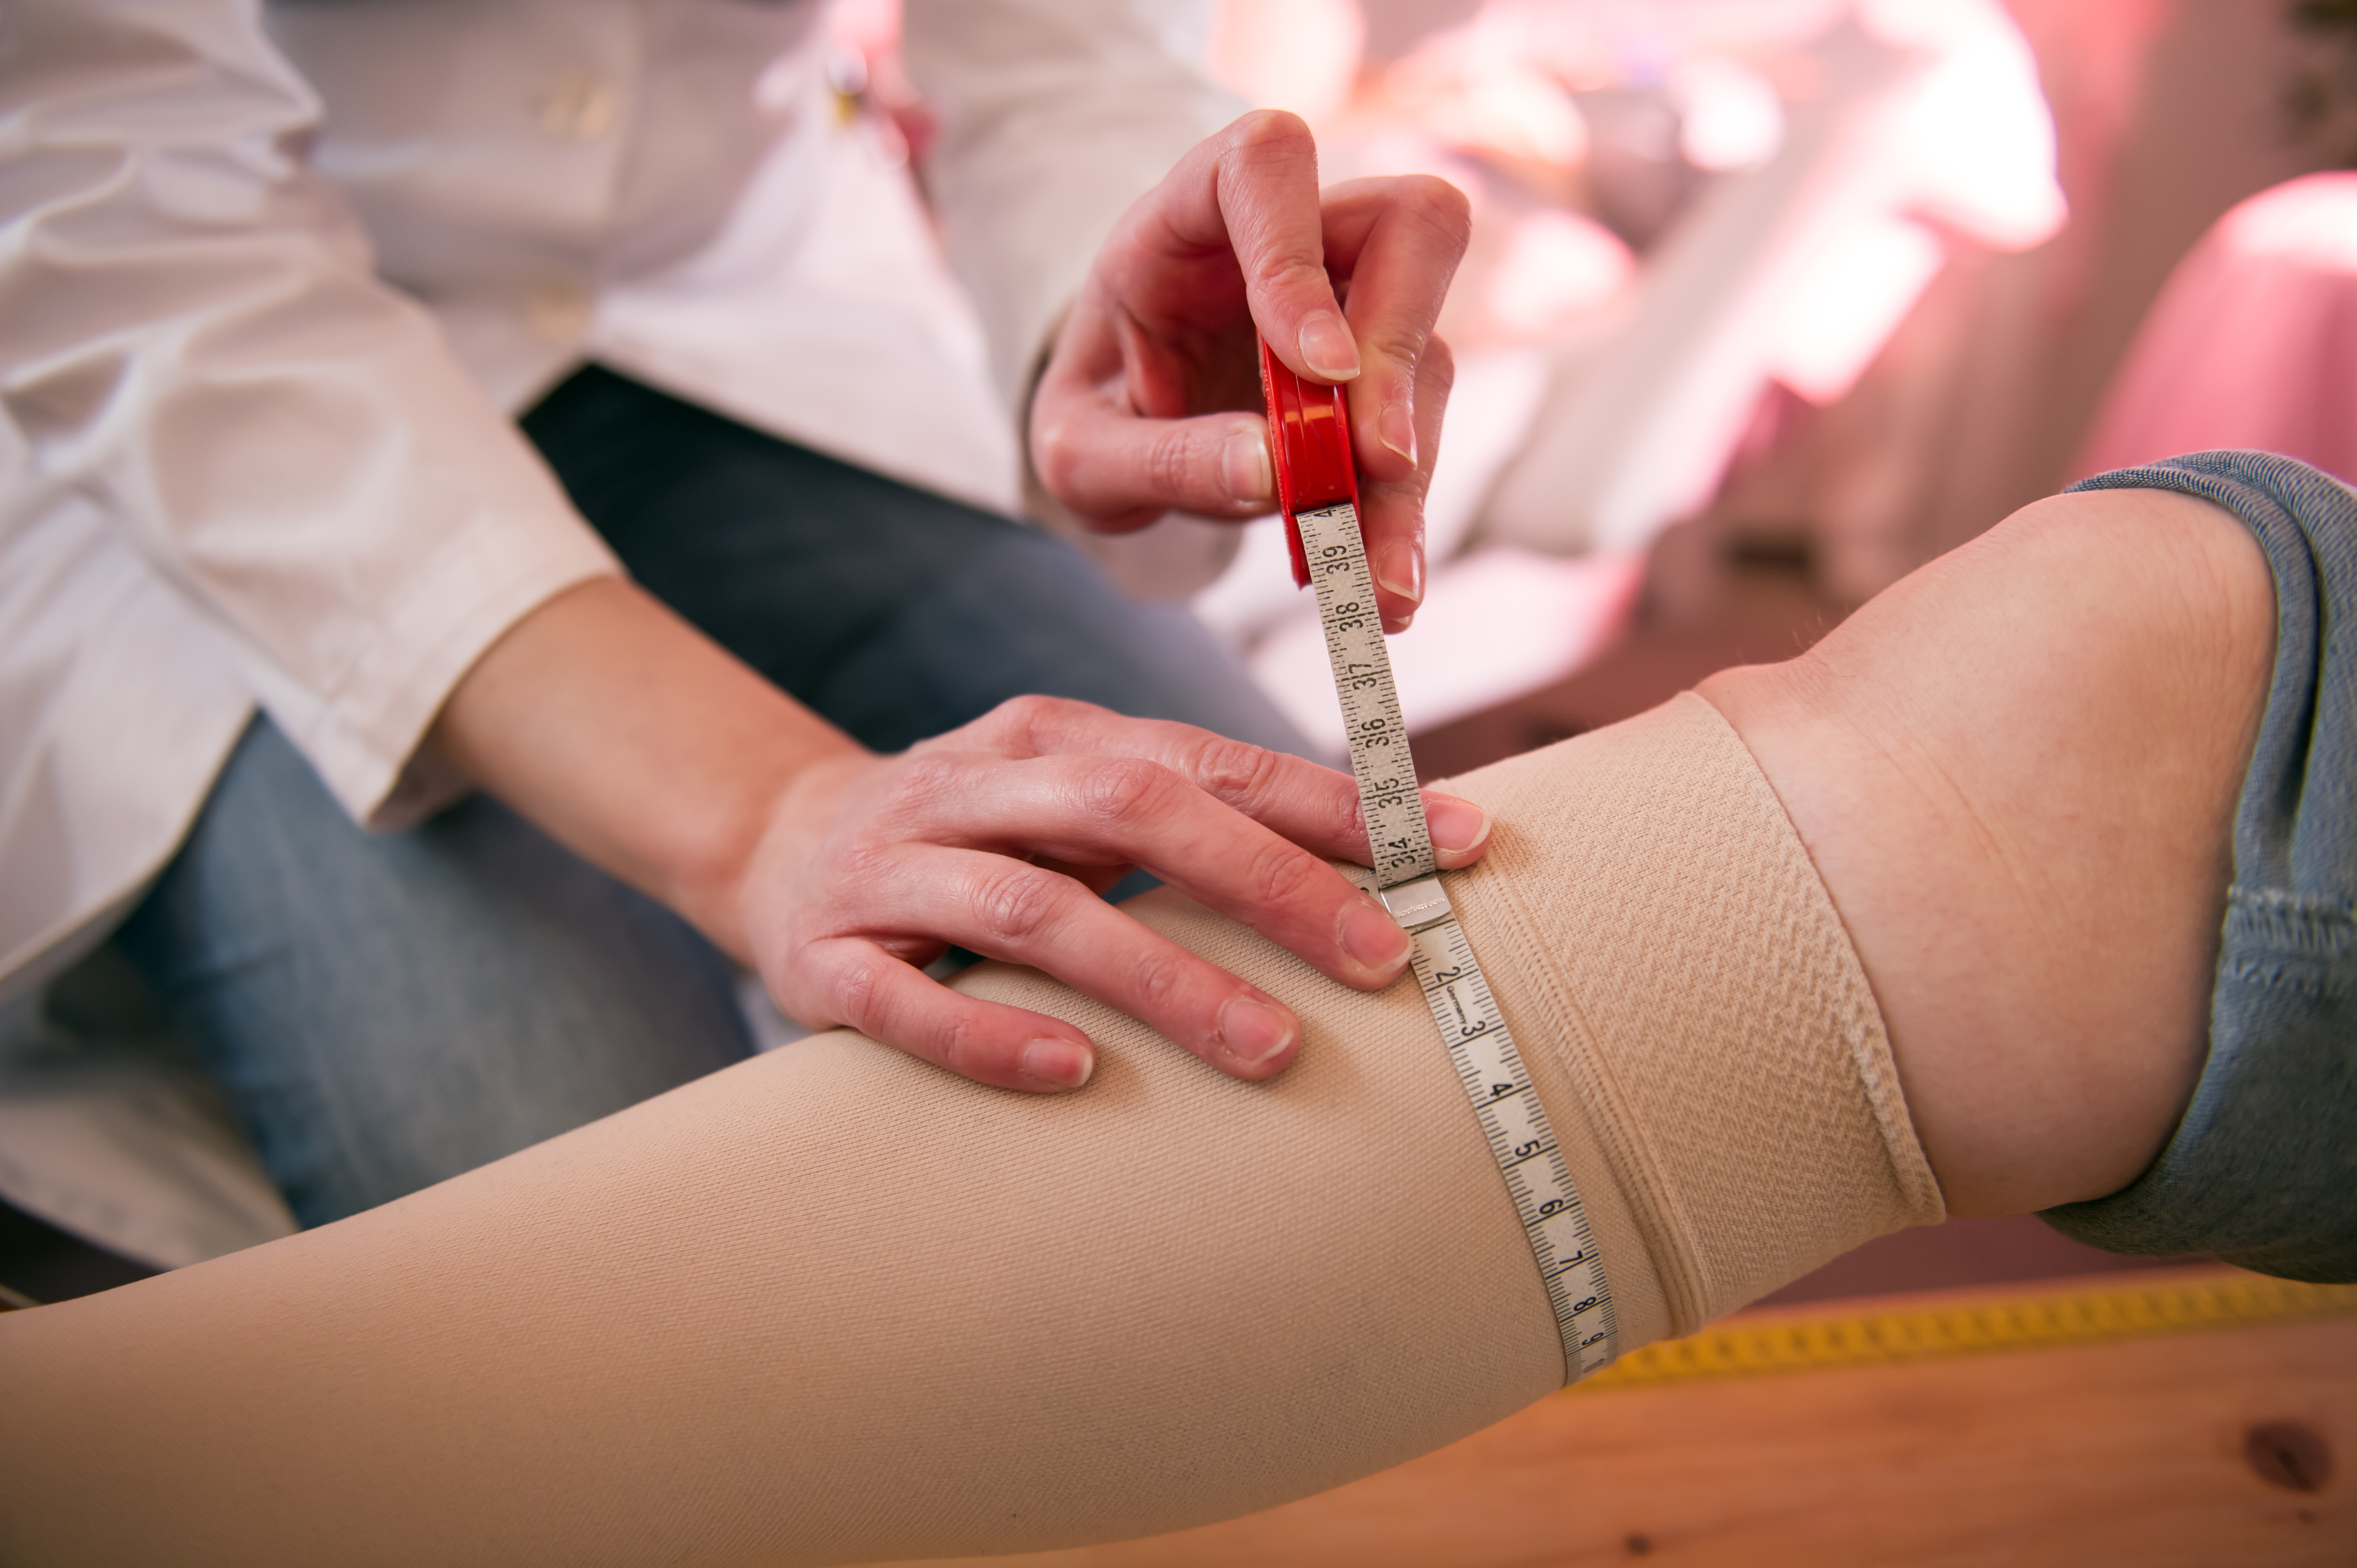 Wear Compression Stockings Before & After a Vein Procedure